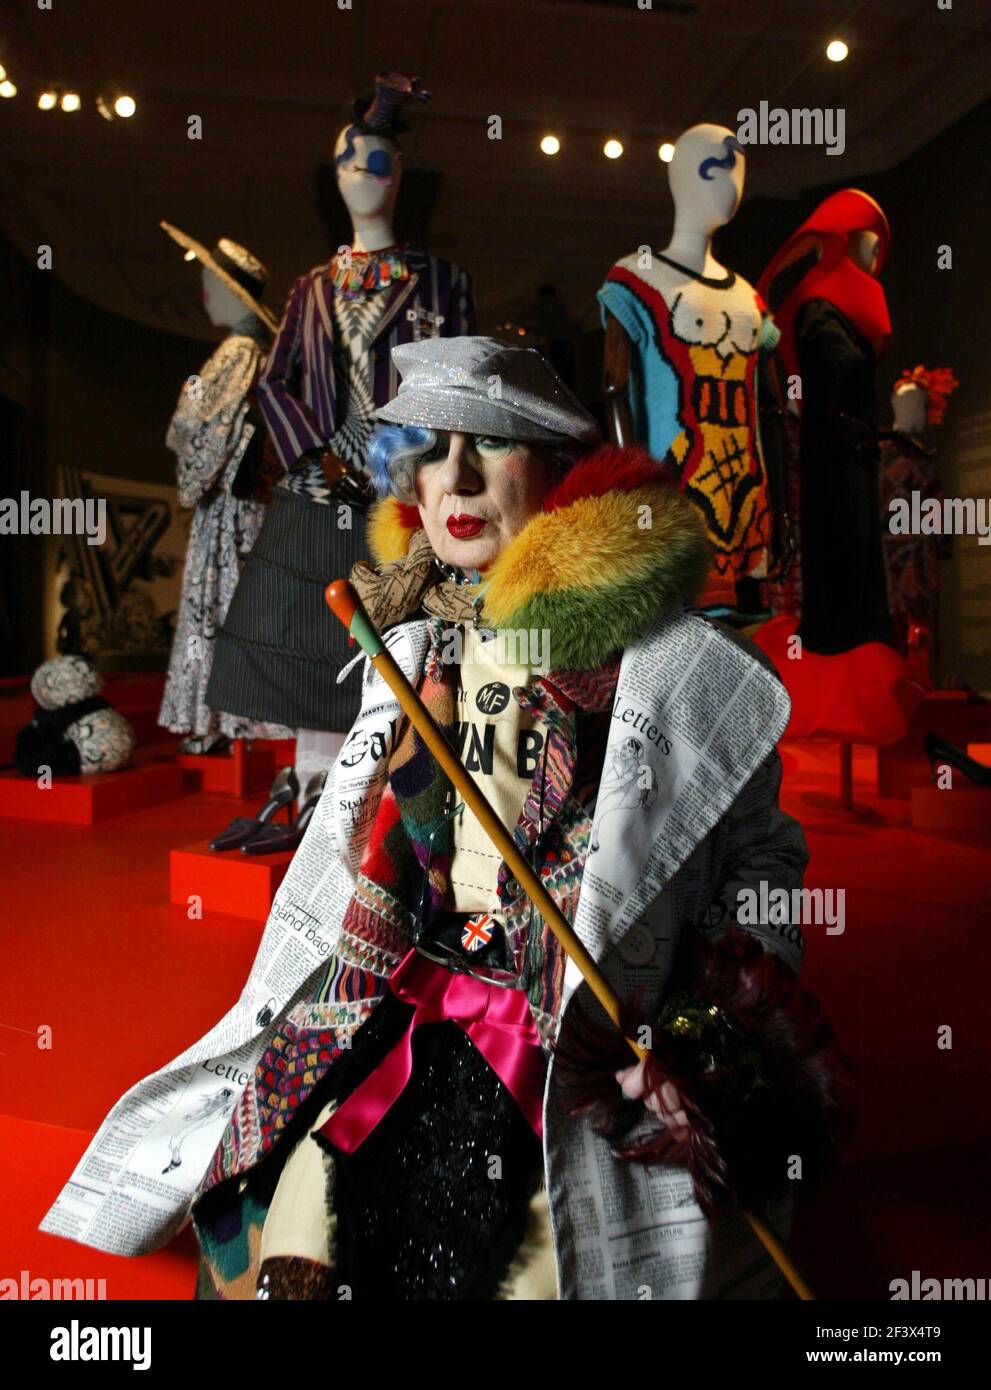 Anna Piaggi in her  FASHION-OLOGY exhibition held at the Victoria and Albert Museum in London, the exhibition runs from 2 Feb to 23 April 2006.pic David Sandison 30/6/2006 Stock Photo